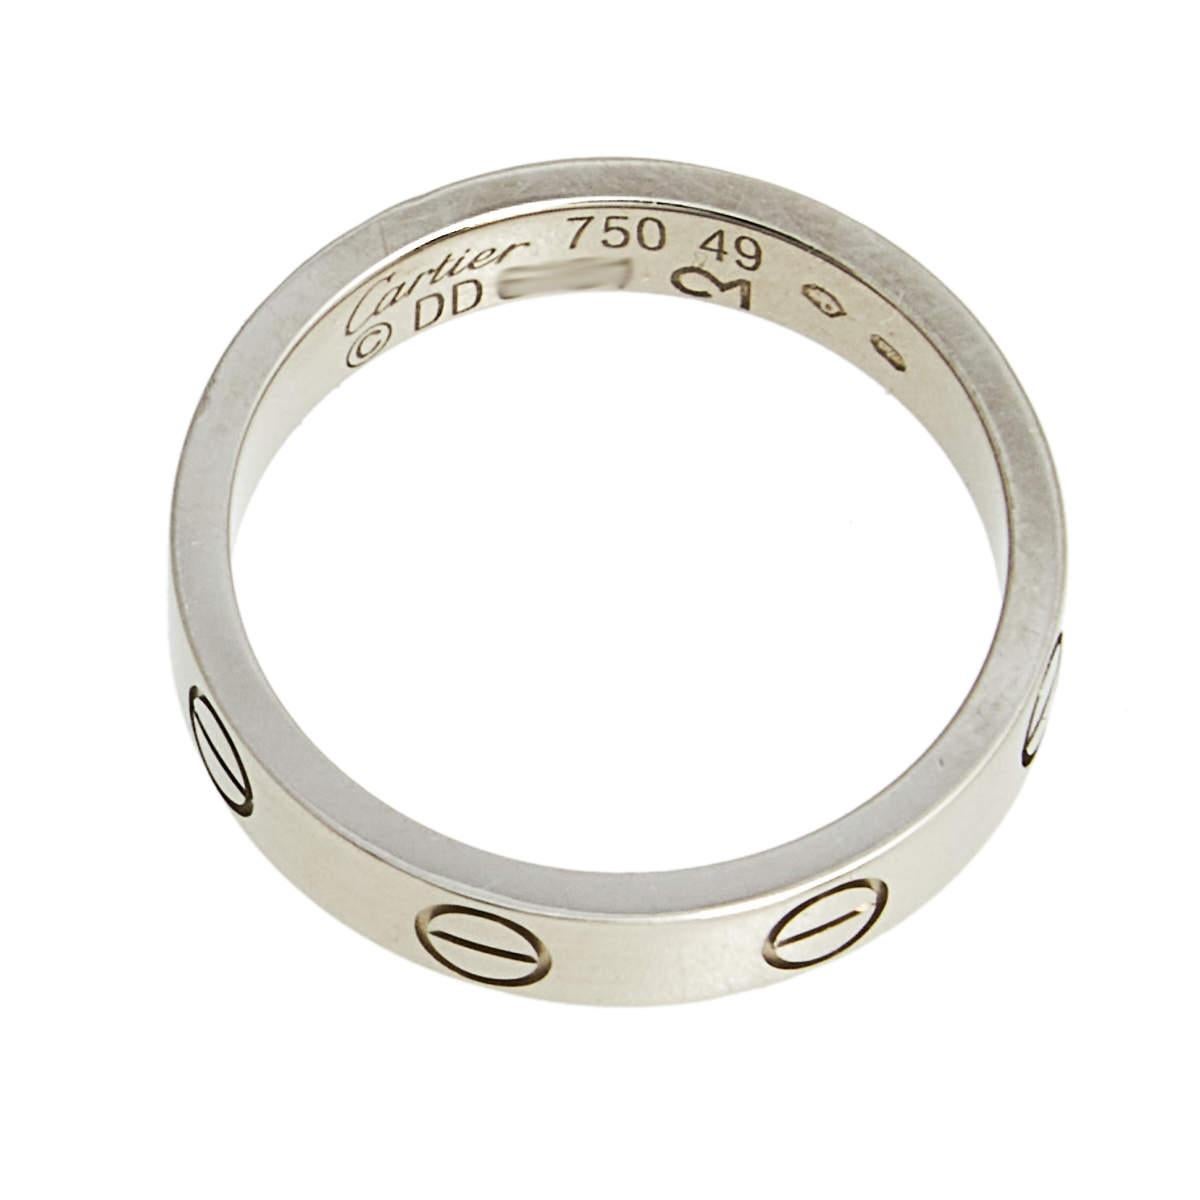 Cartier Love 18k White Gold Narrow Wedding Band Ring Size 49 4